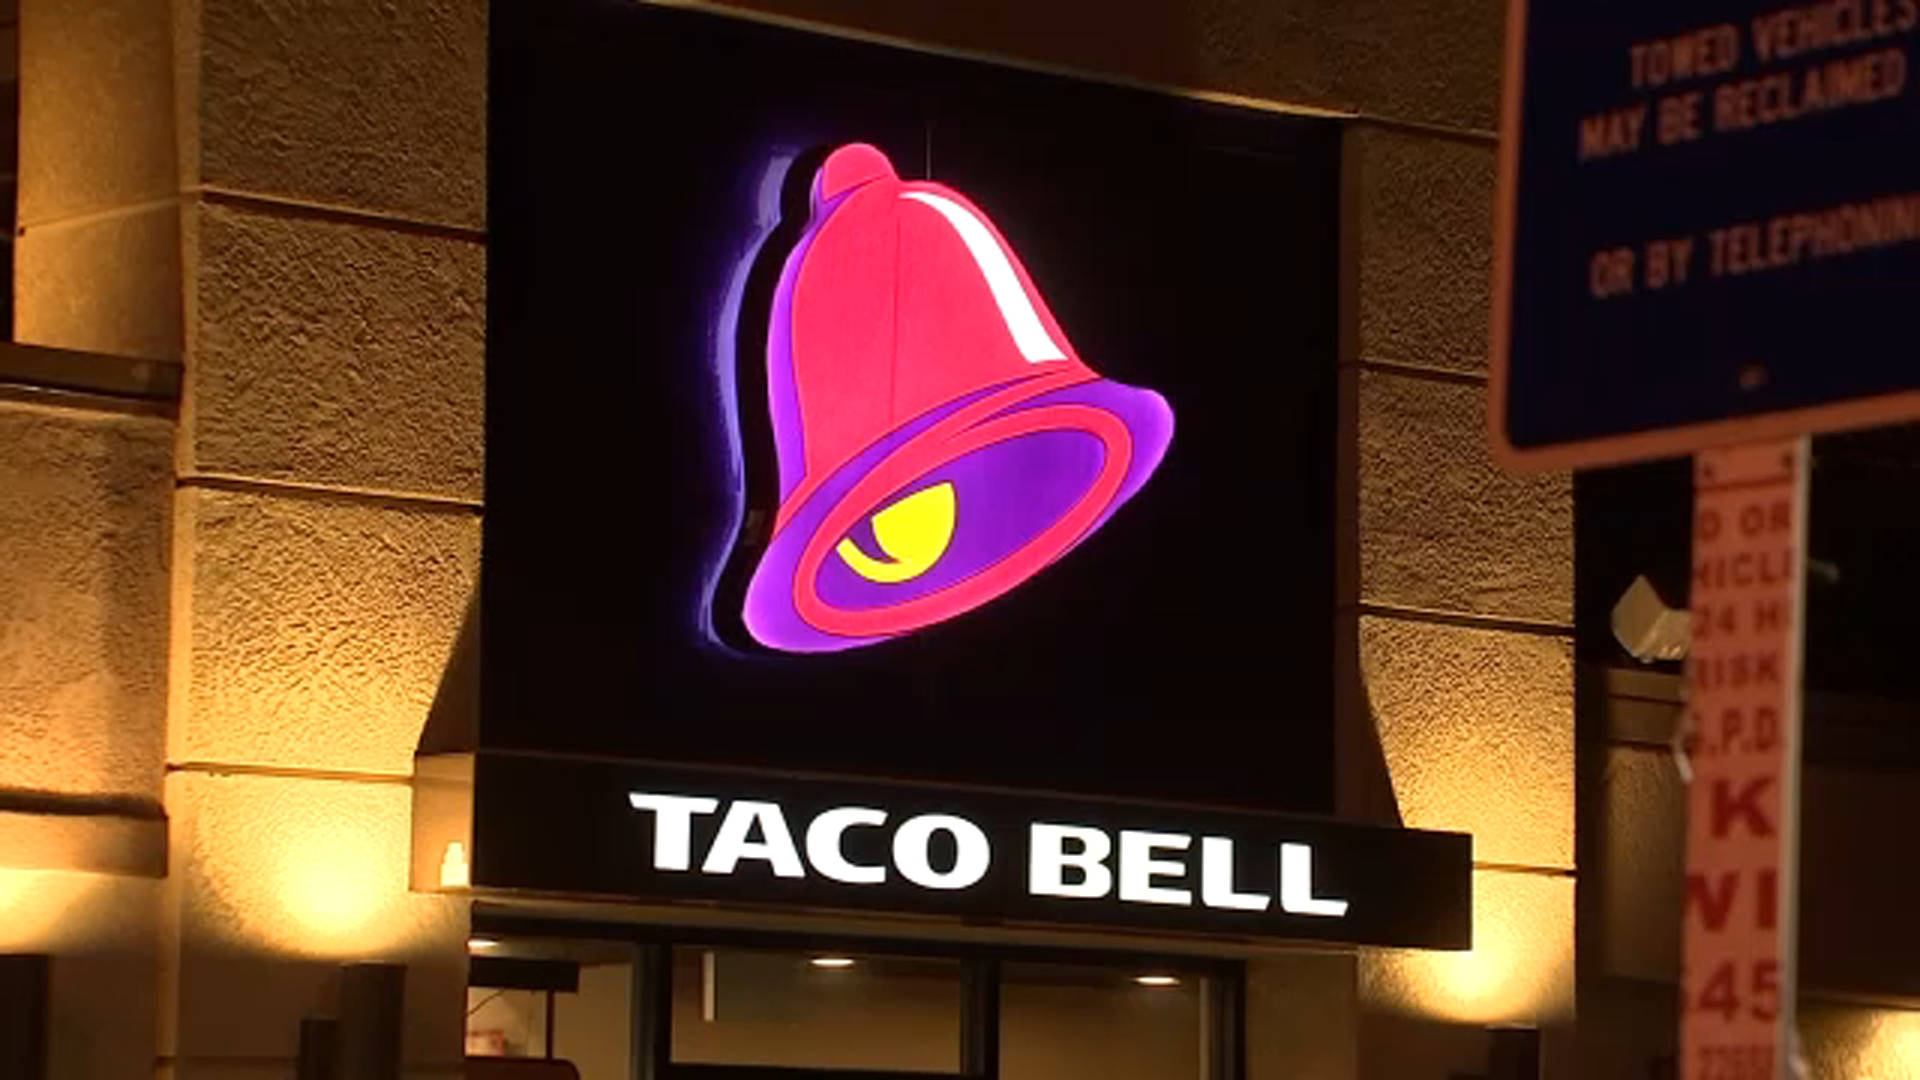 Taco Bell Glowing Signage